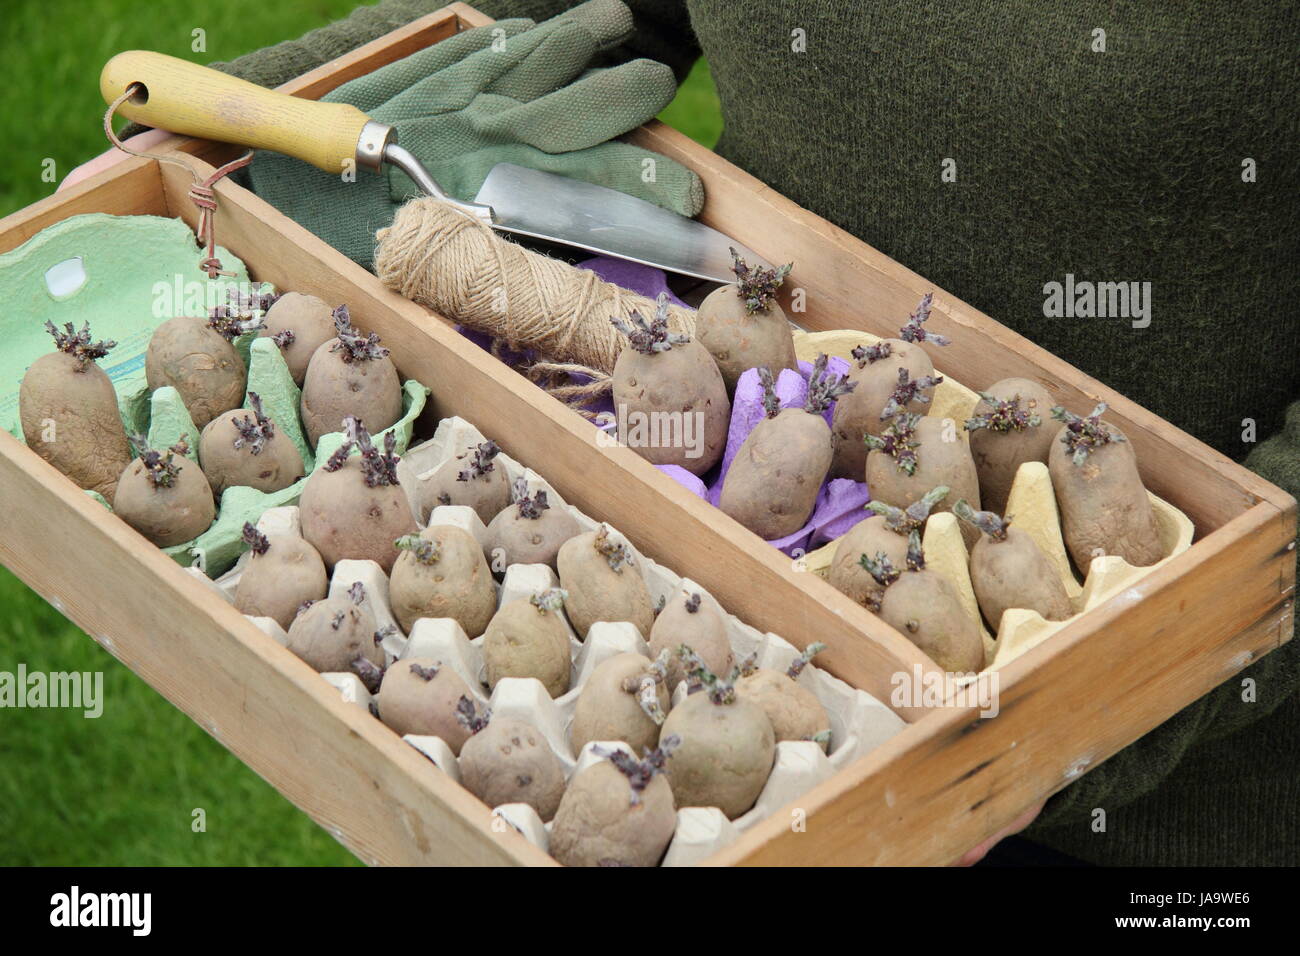 A female gardener carries a wooden tray containing chitted seed potatoes for planting out into the vegetable patch of an English garden, early spring Stock Photo